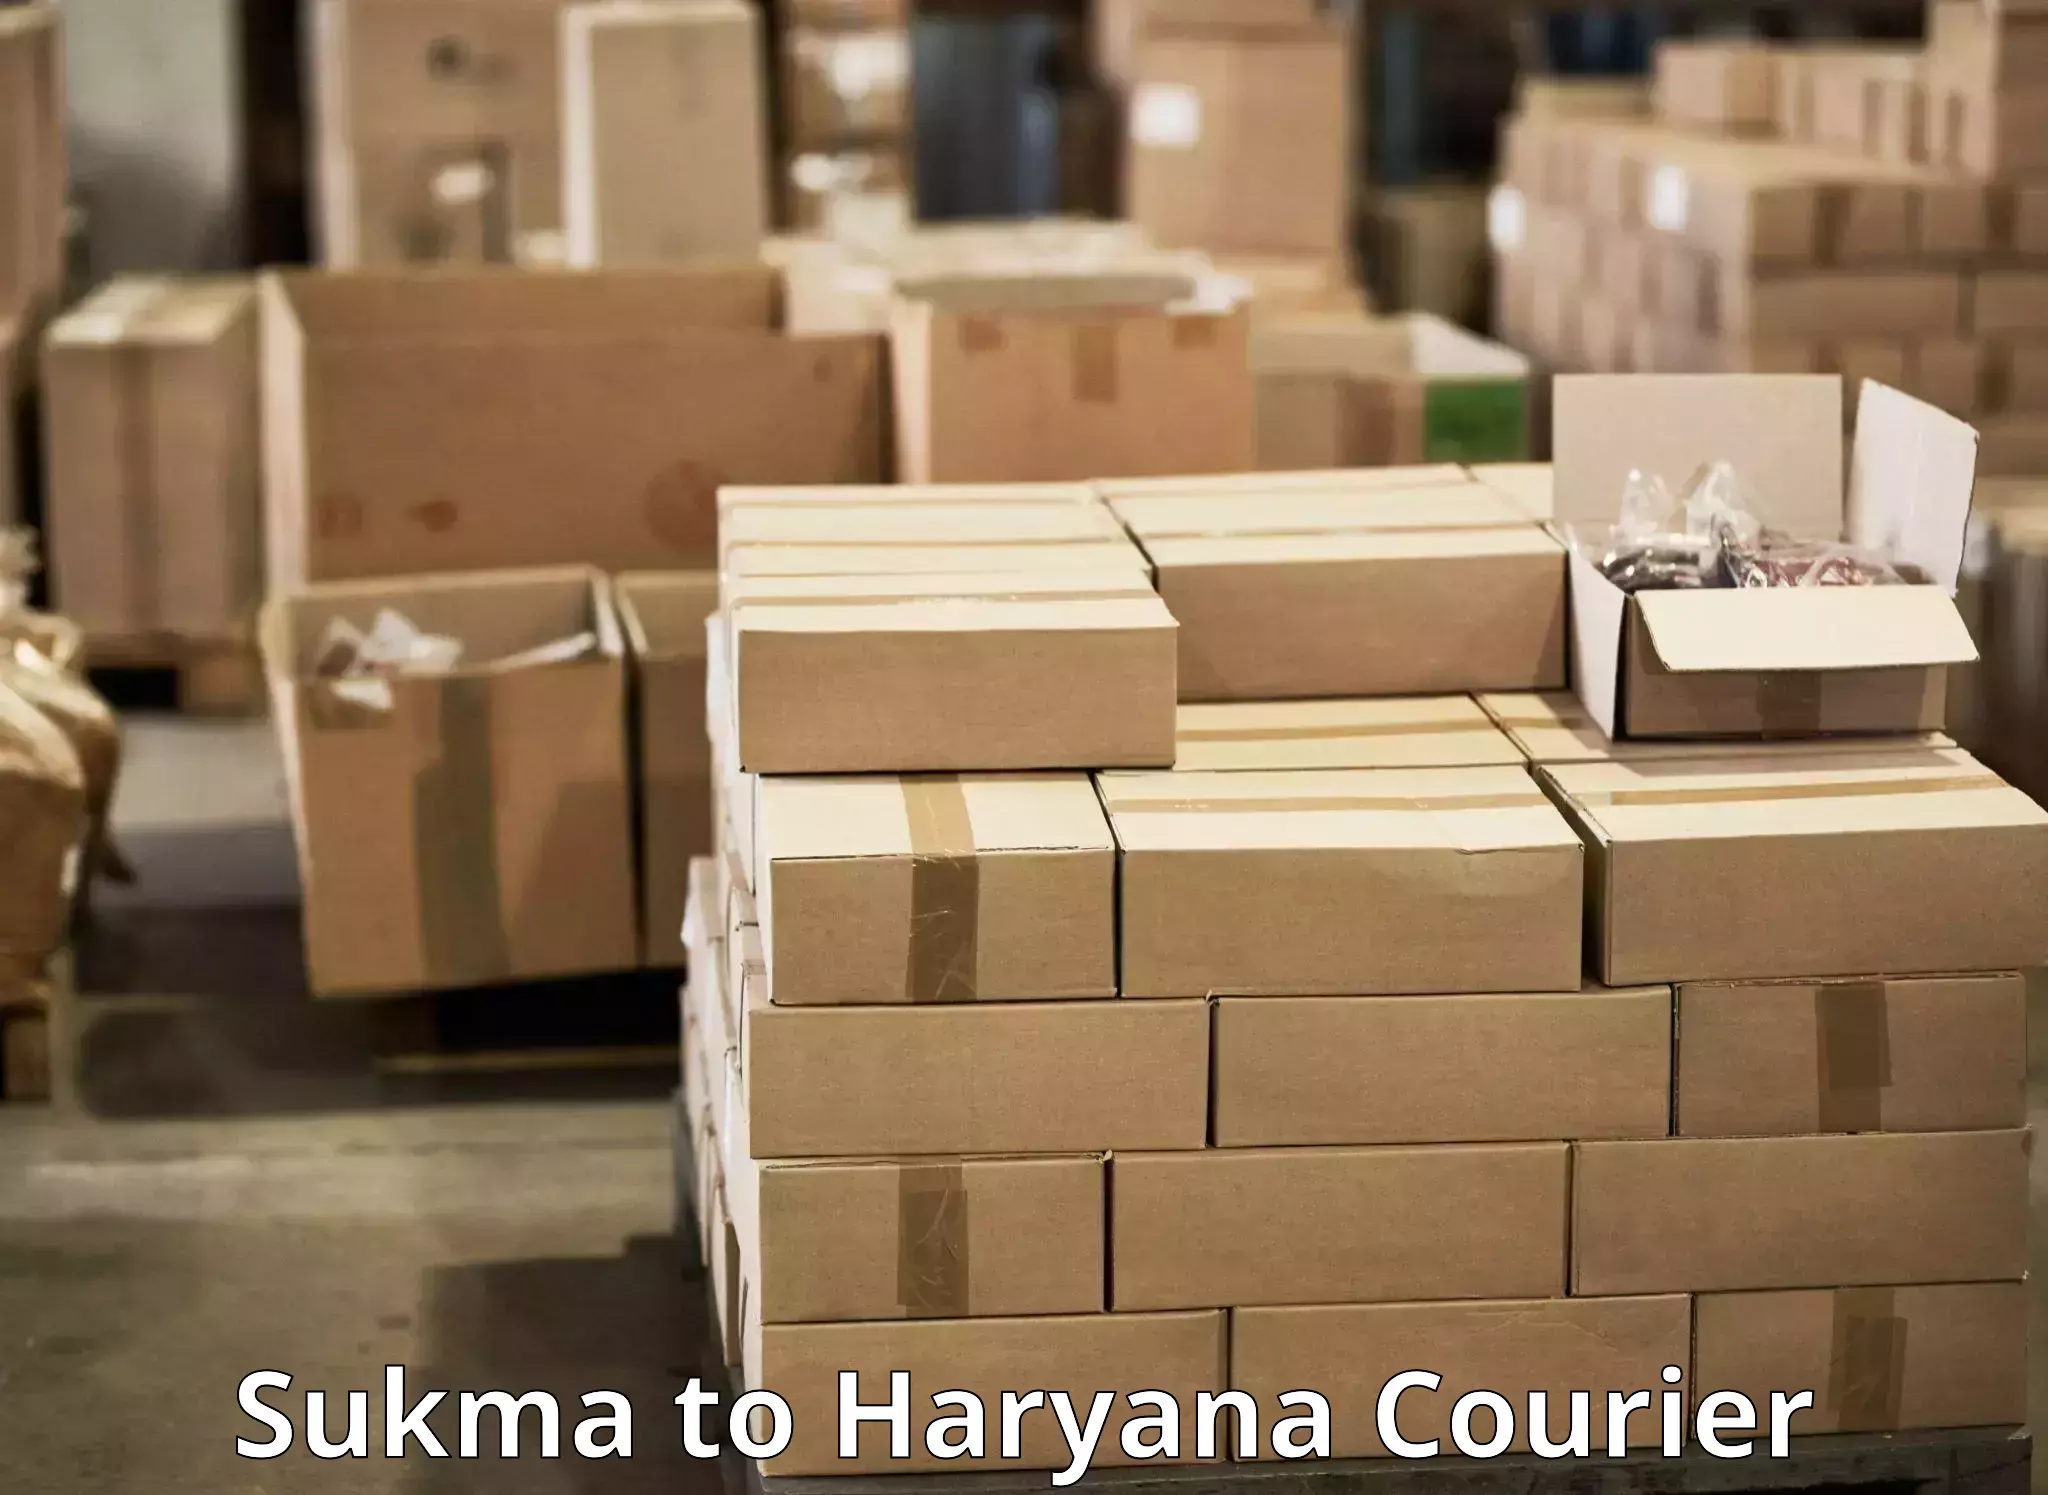 High value parcel delivery Sukma to NCR Haryana